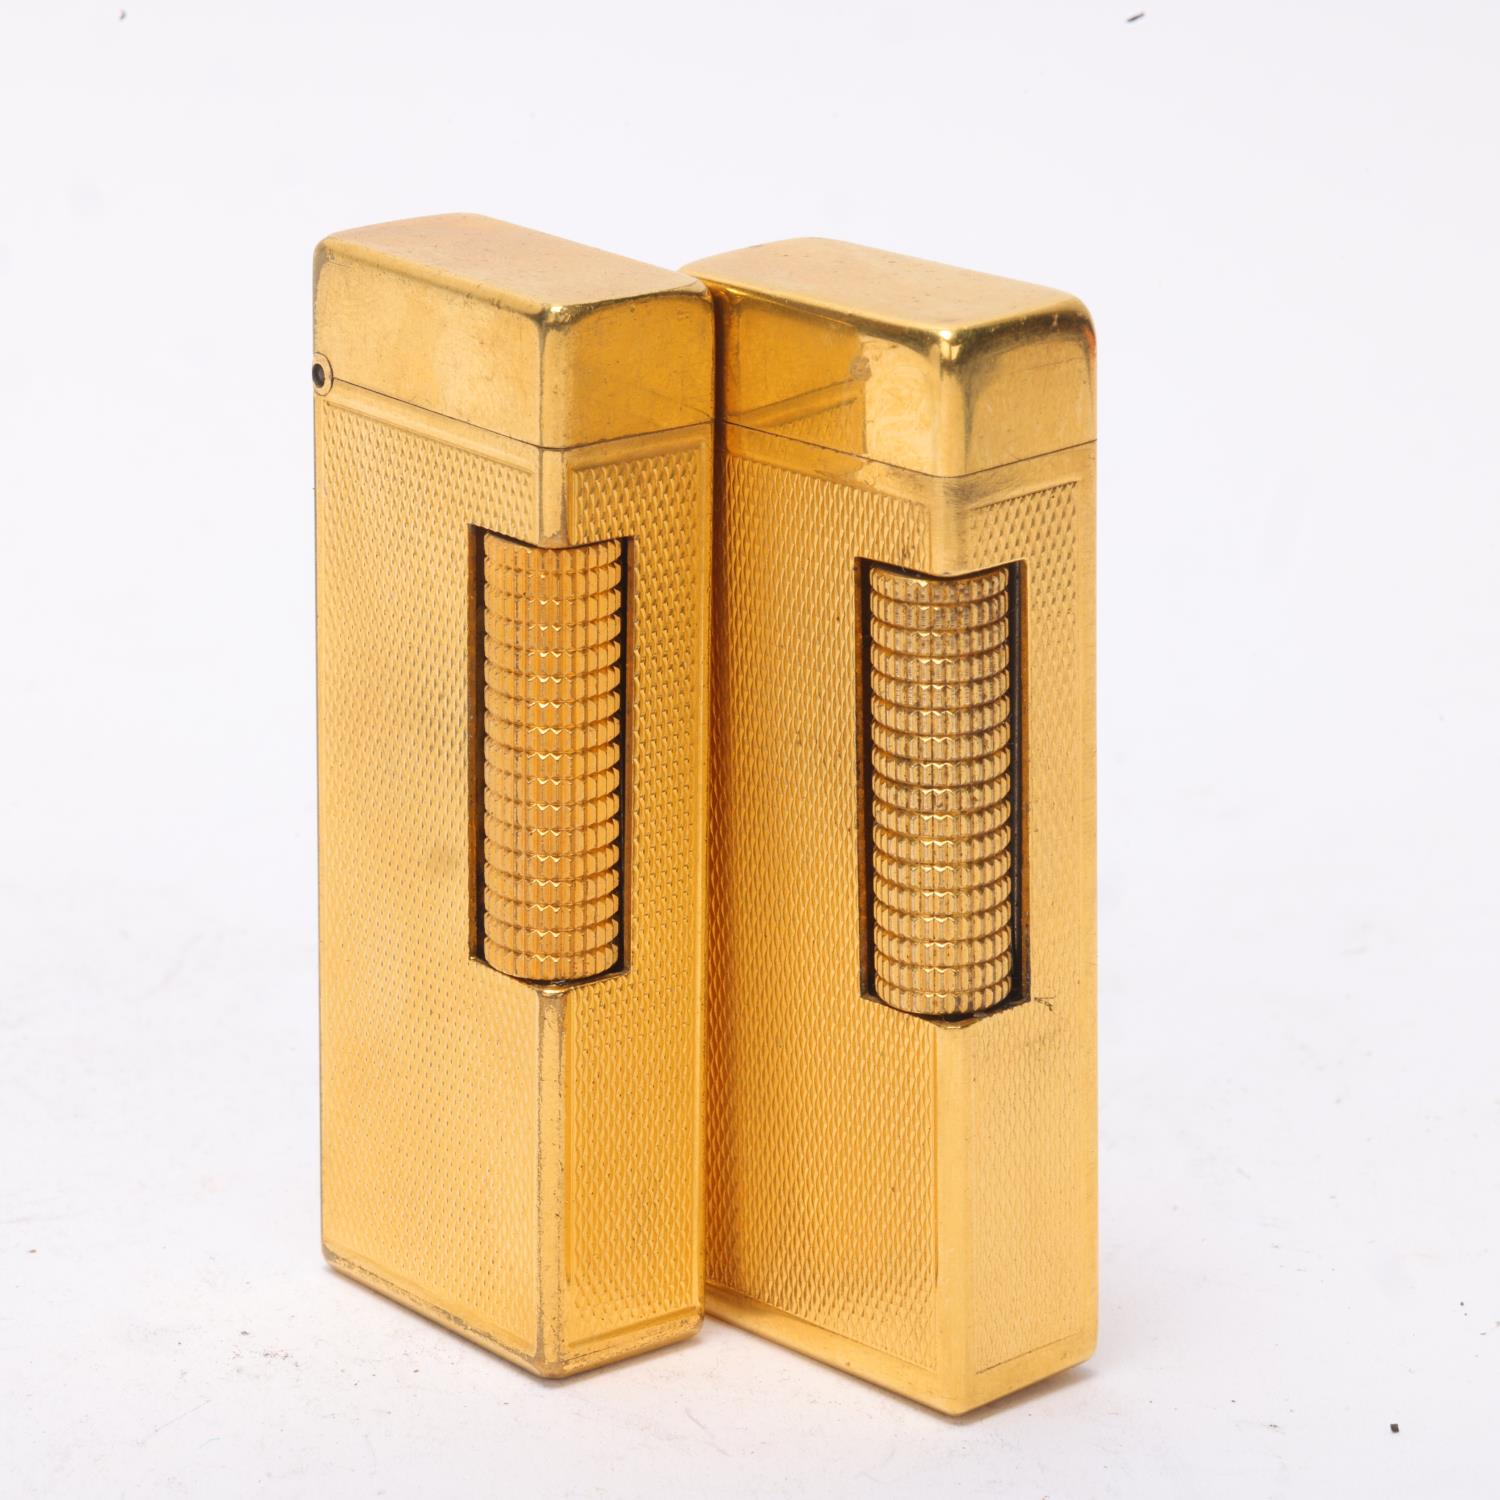 2 vintage Dunhill gold plated Rollagas lighters, with engine turned bodies, mechanism USA Pat No - Image 4 of 4